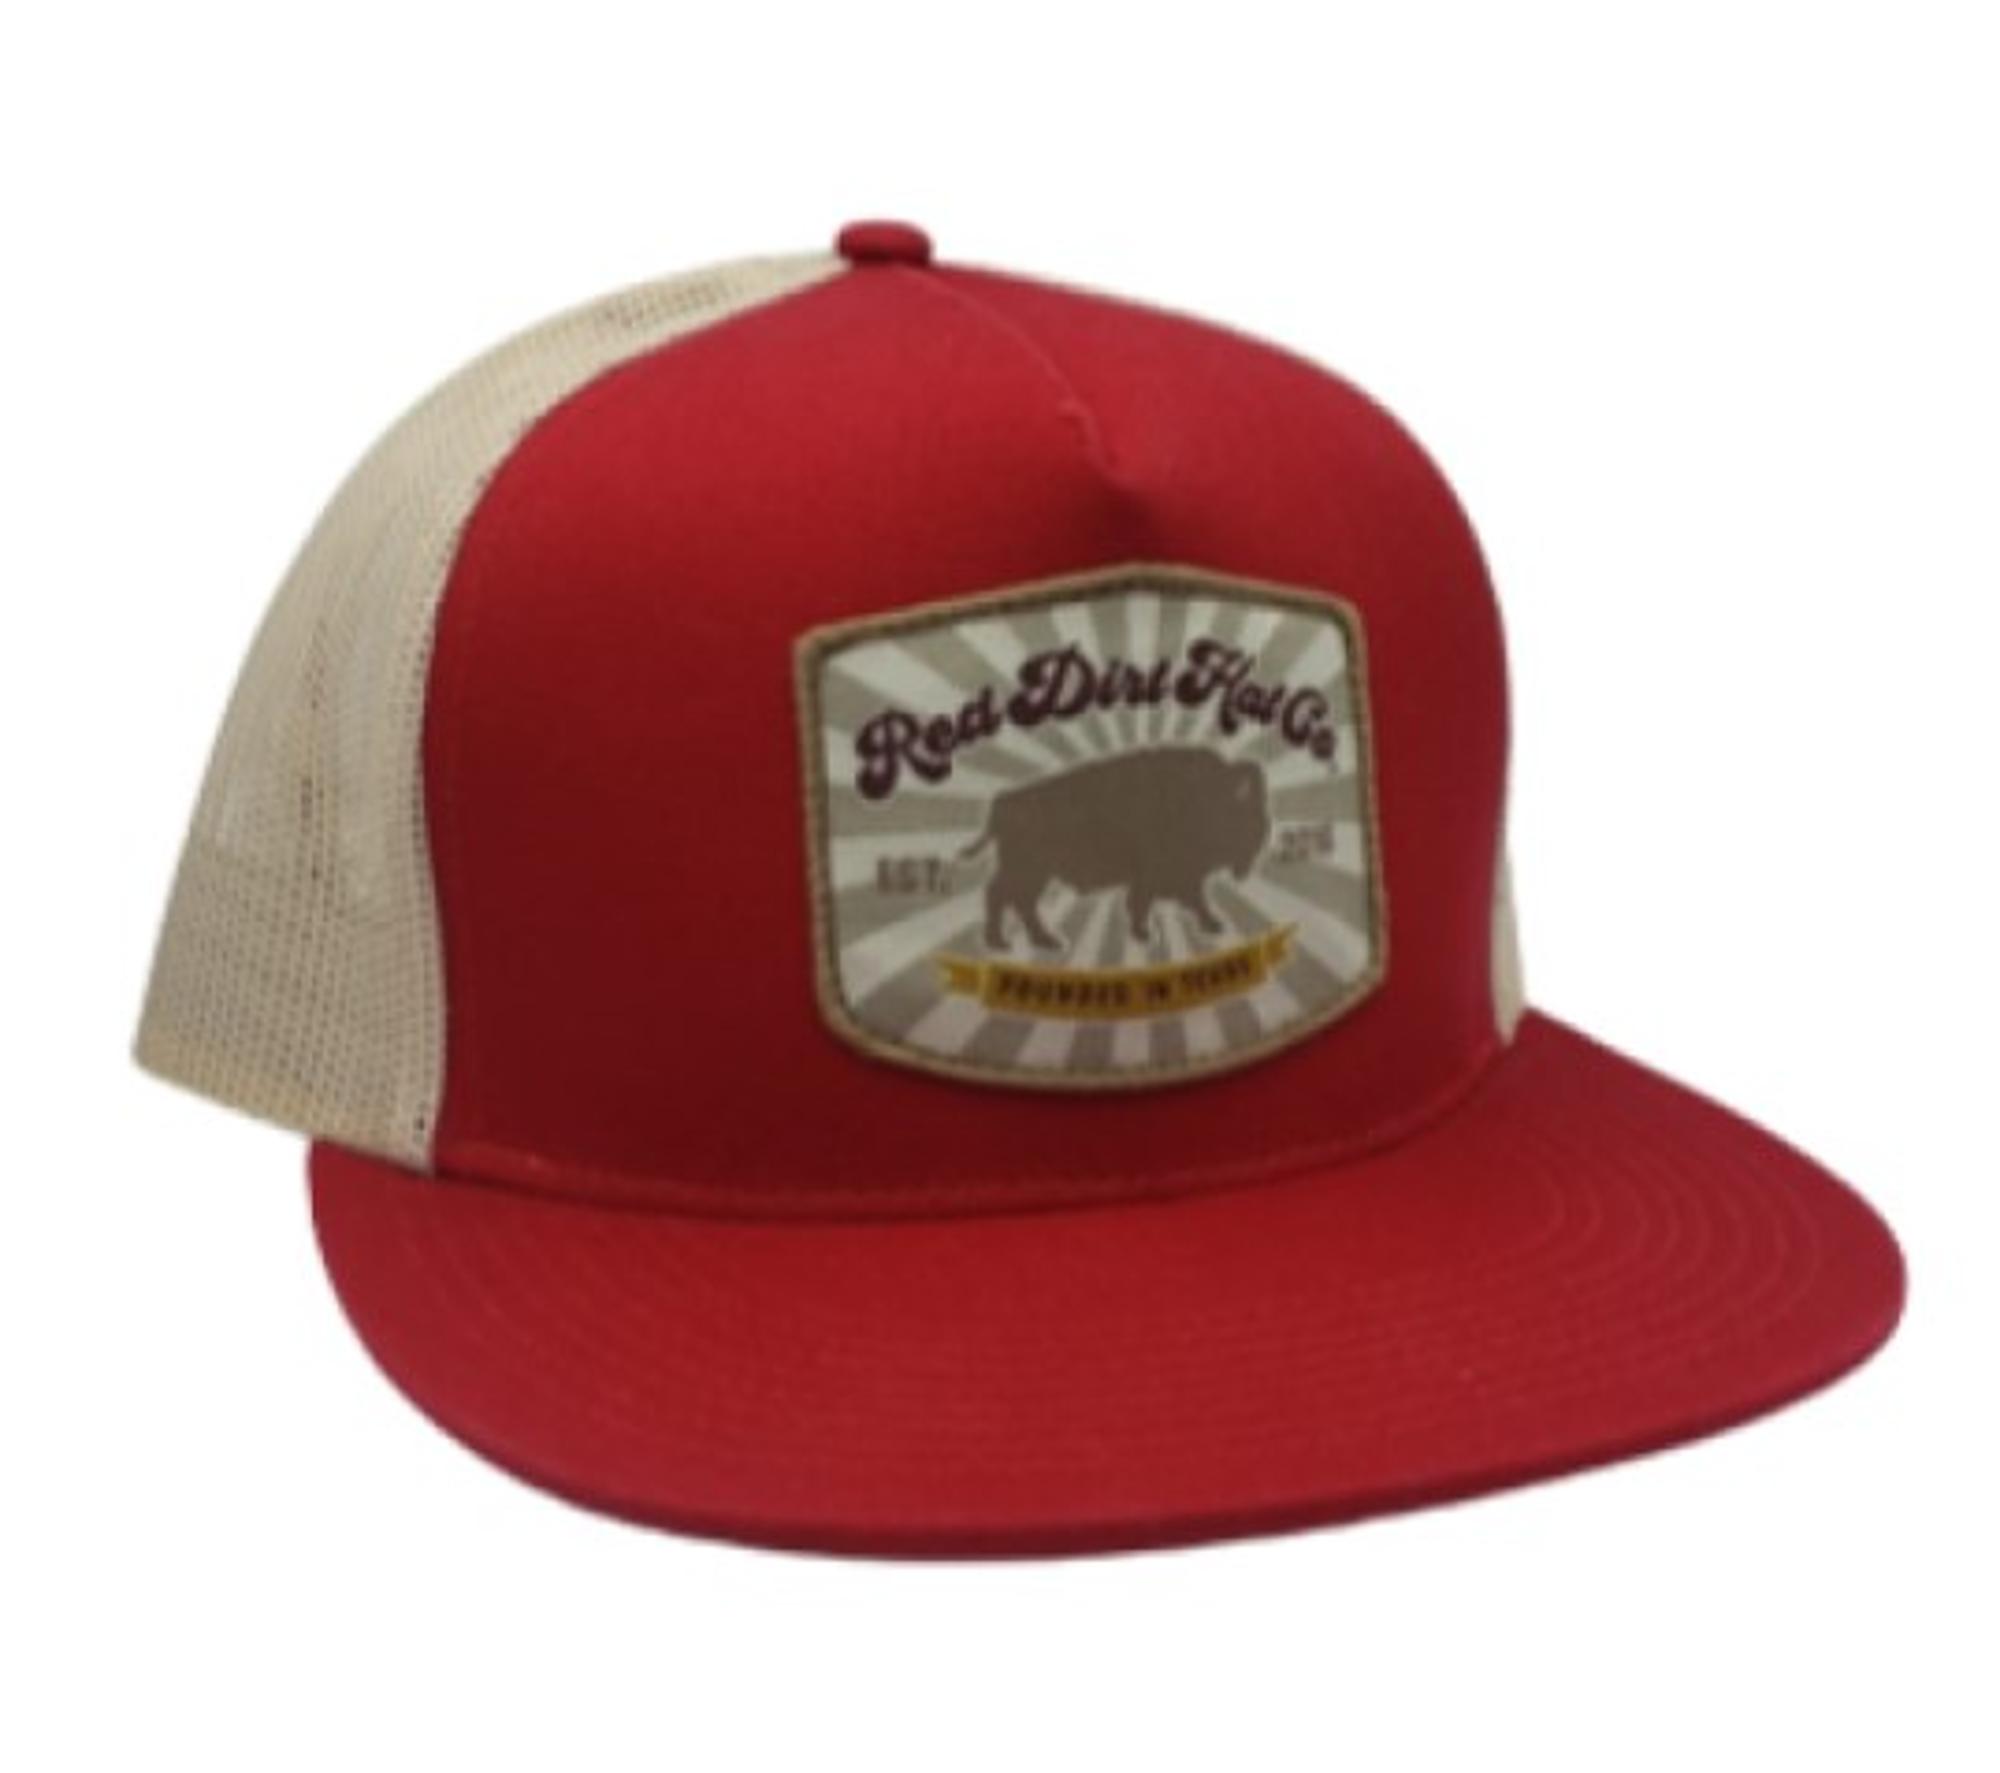 Founded Trucker Hat